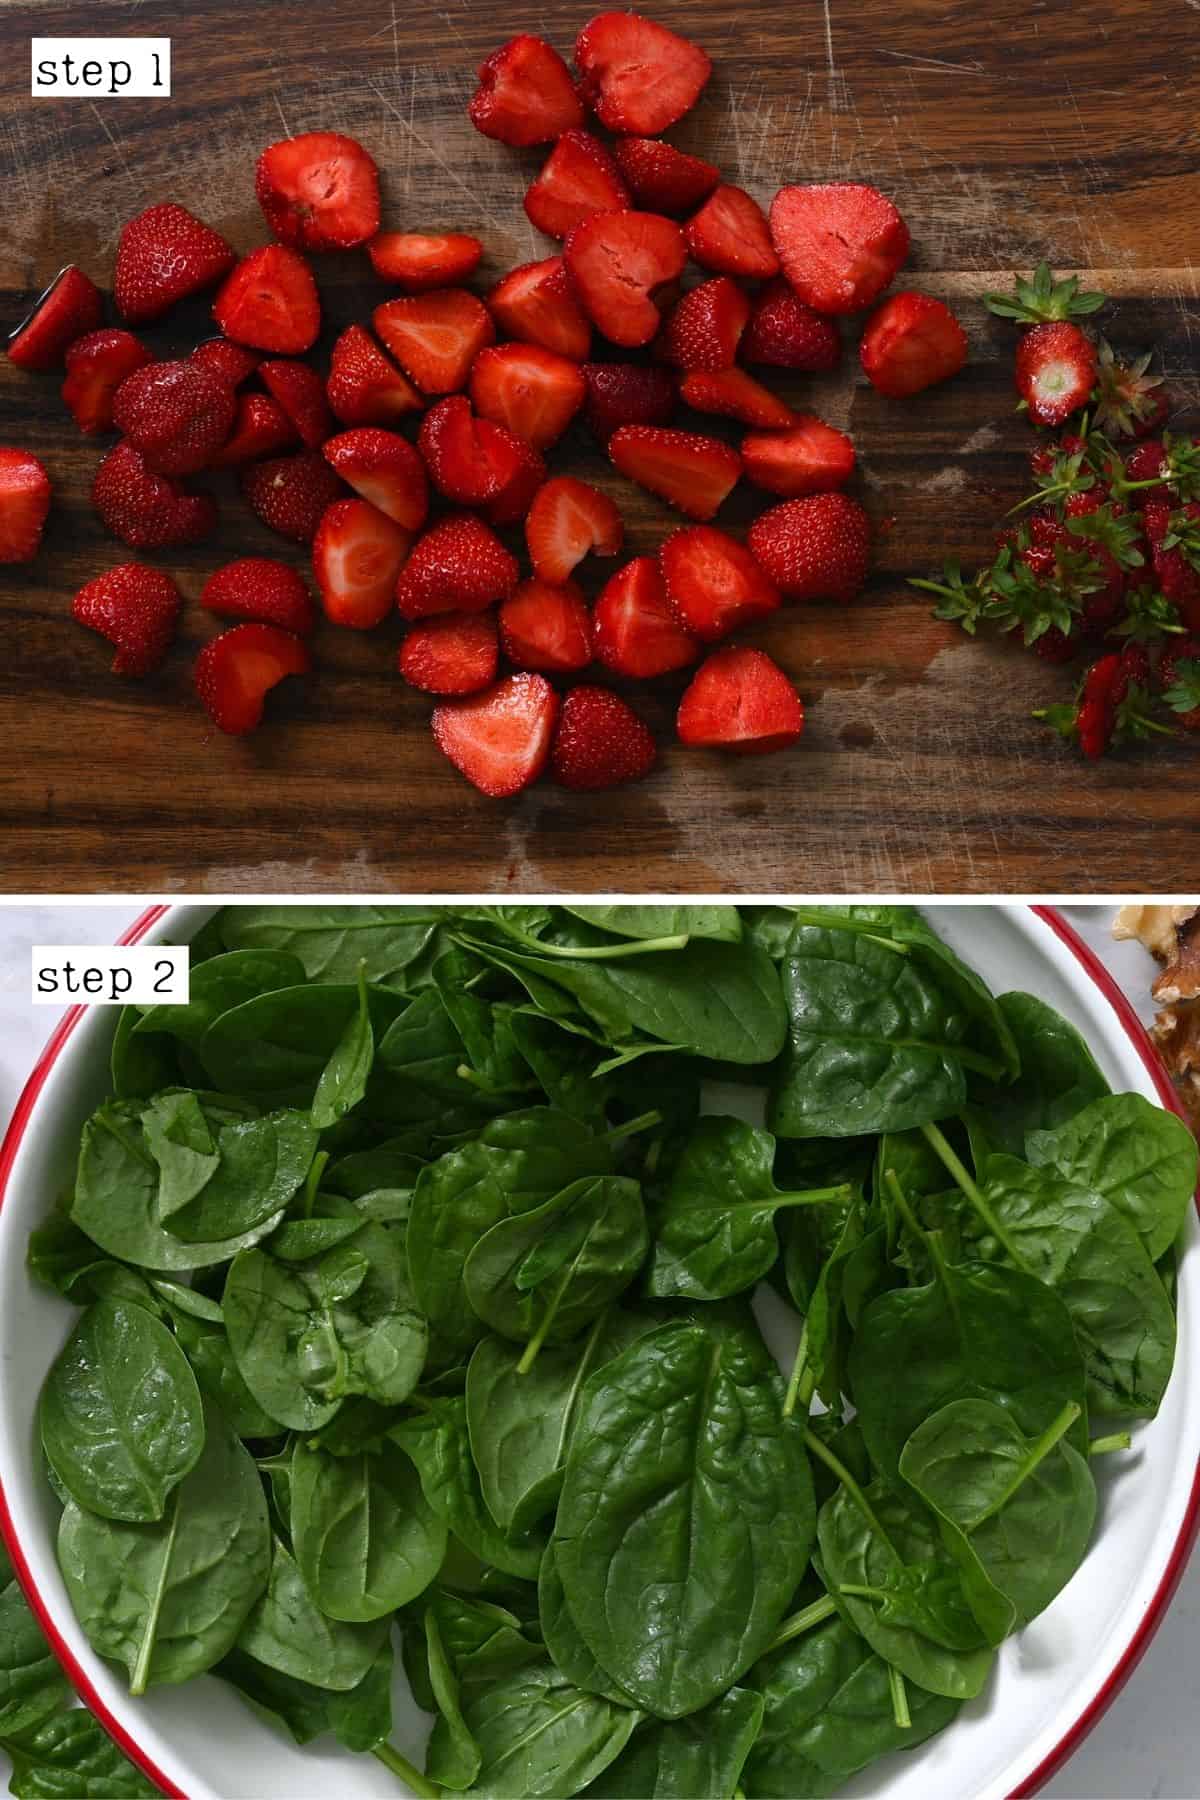 Steps for prepping strawberries and spinach